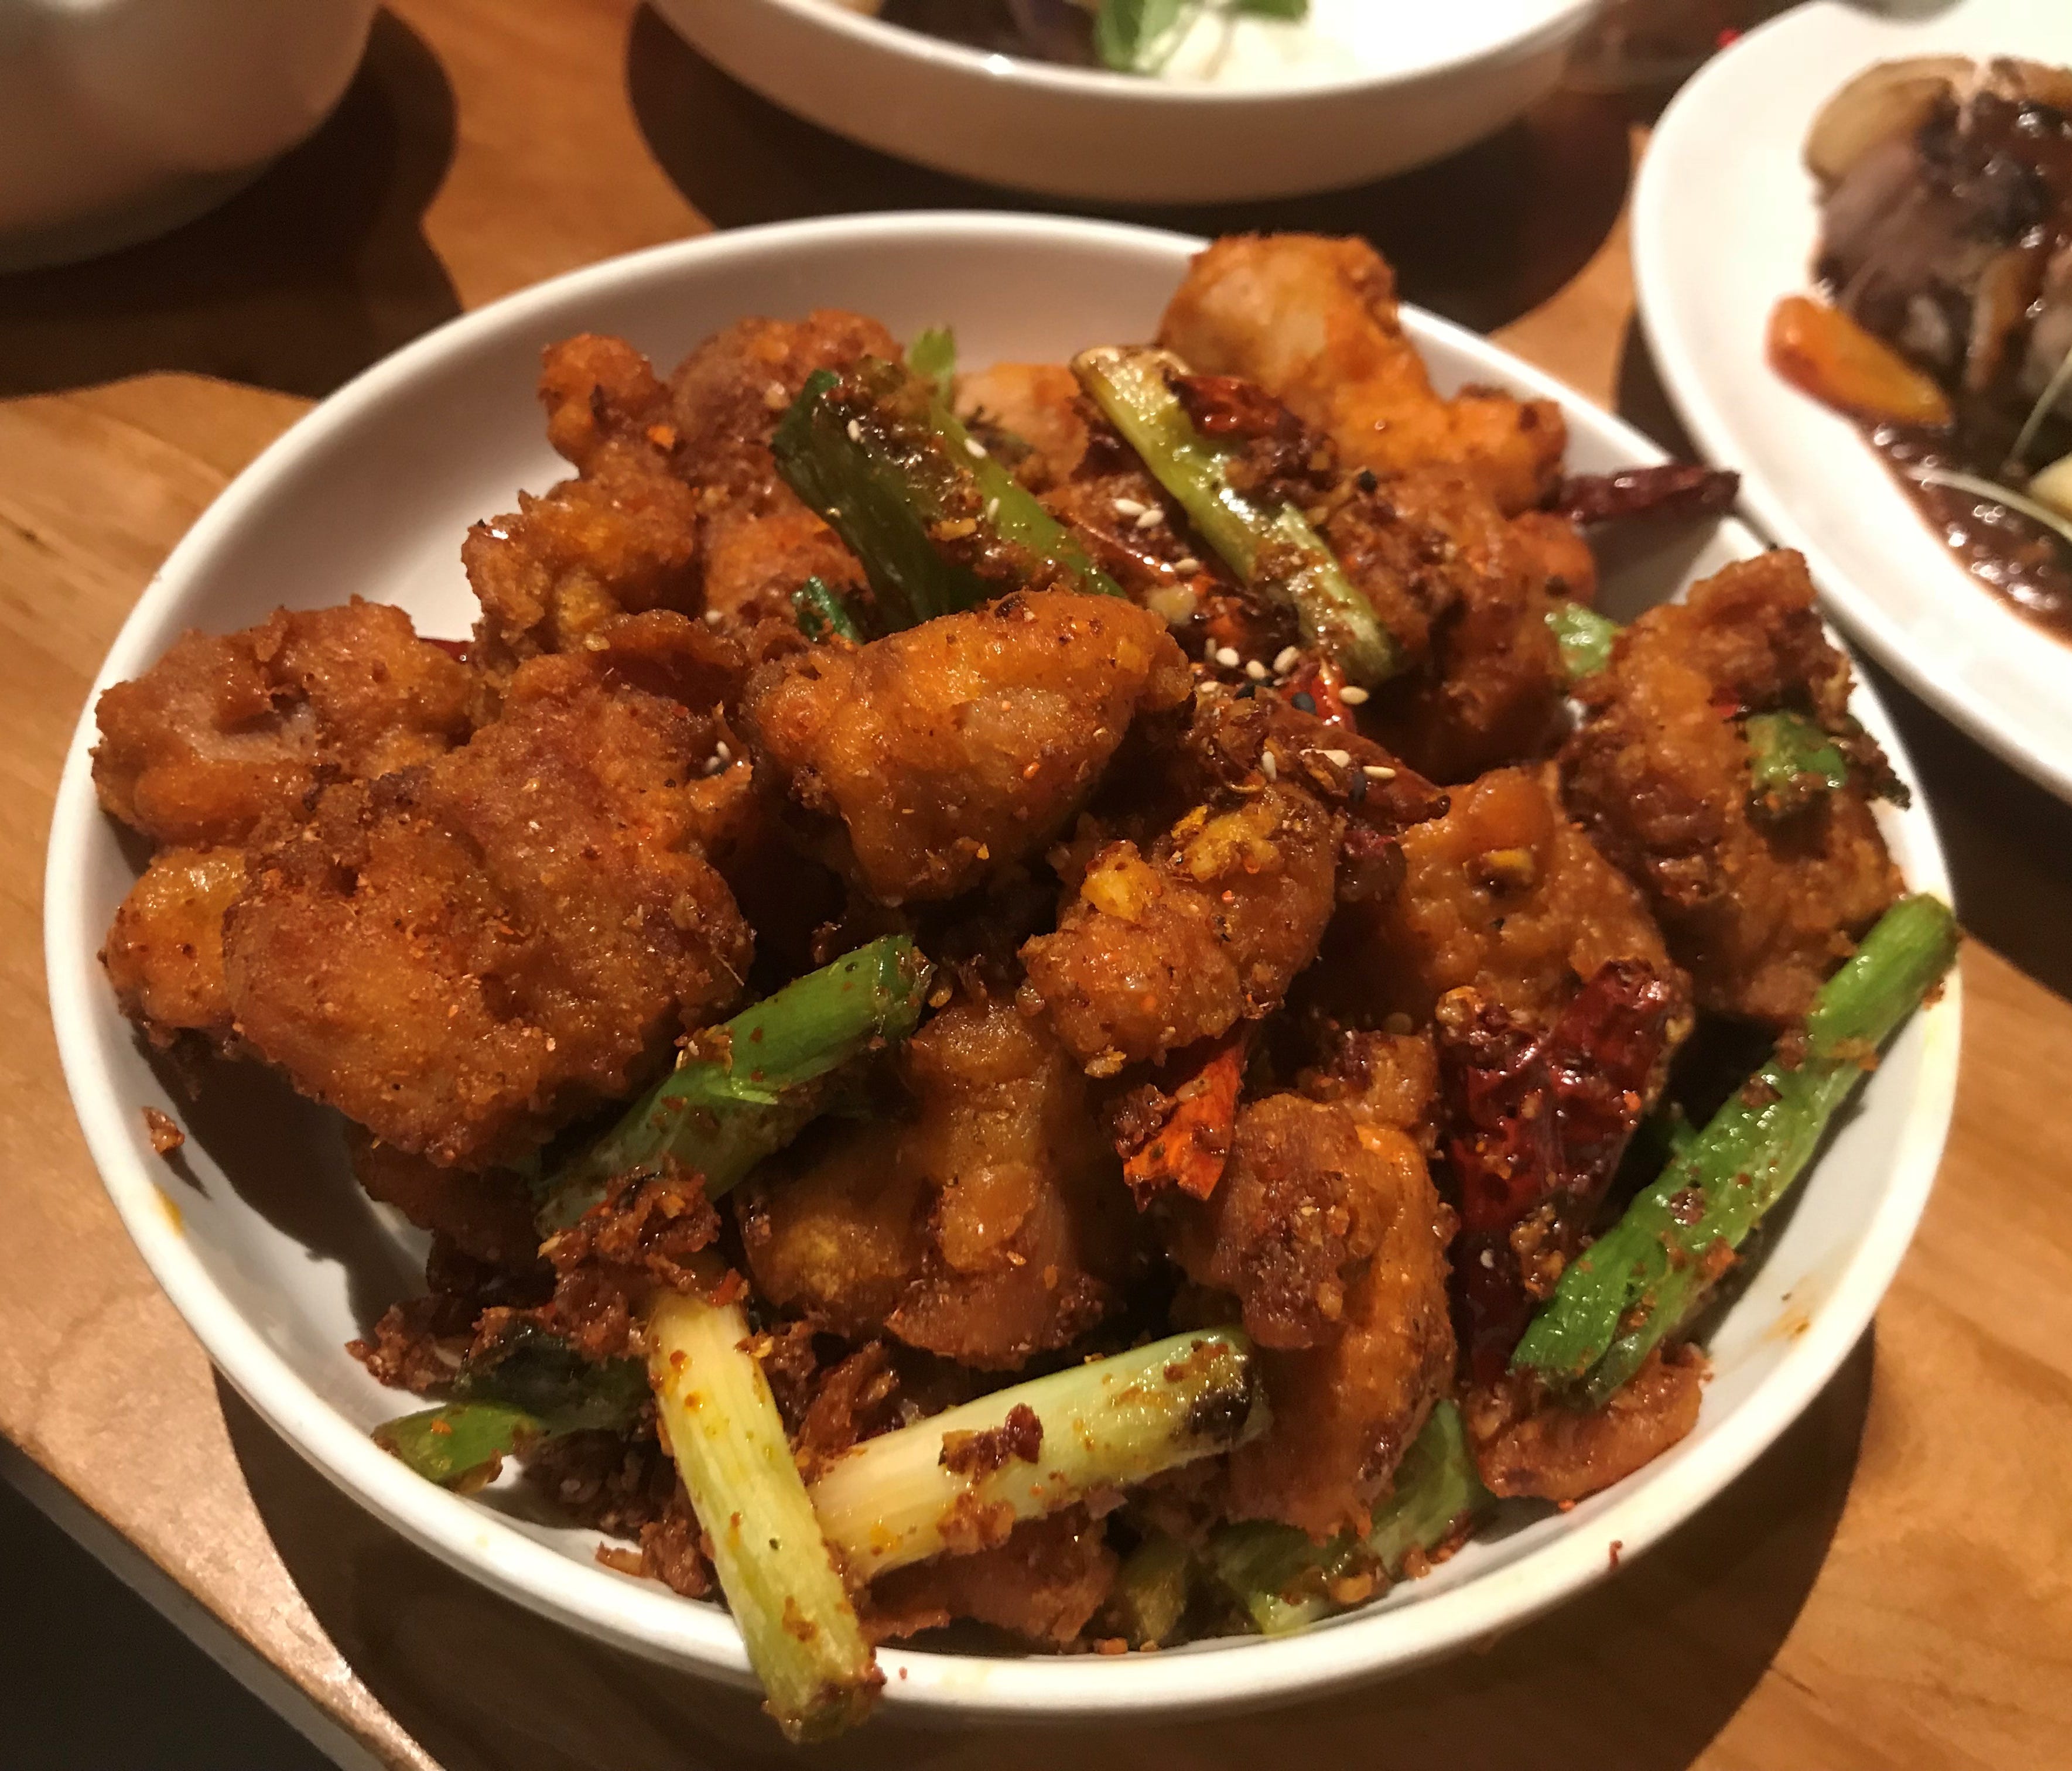 The star of the show here is the La Zi Jim, fried chicken, which is very spicy, and very addictive. It is boneless chunks of fried chicken with dried chilies and Sichuan pepper, and once you start it is hard to stop. Like most entrees here, it is ser